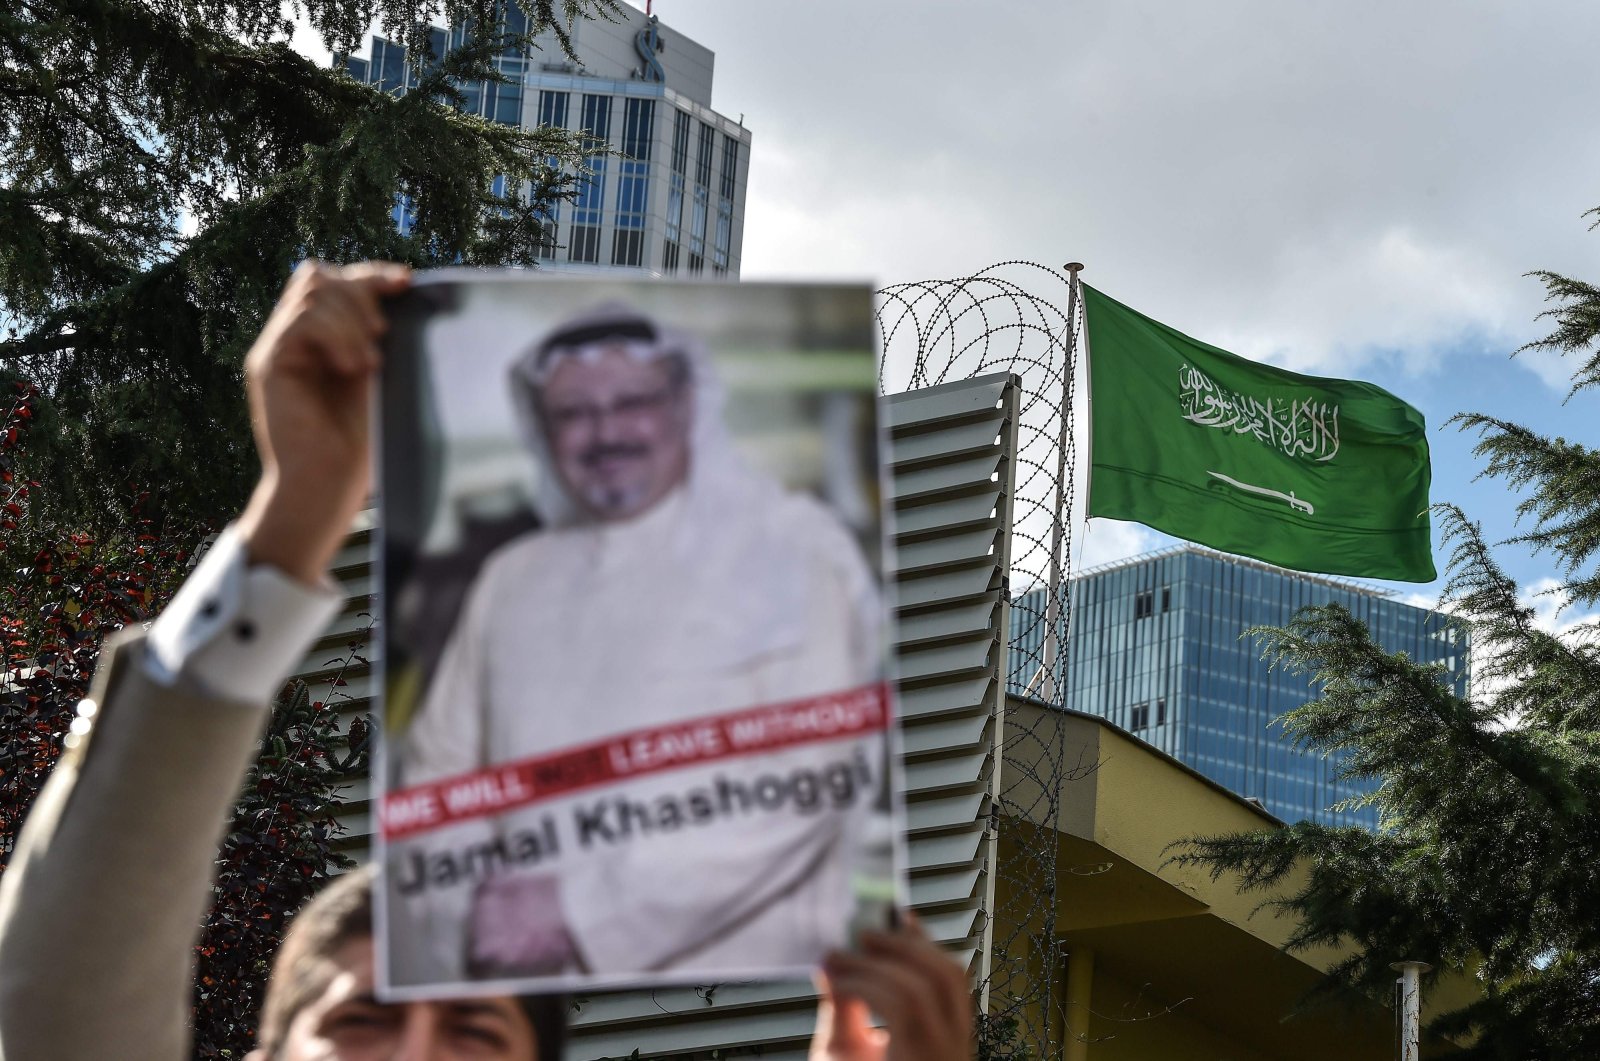 A protestor holds a picture of journalist Jamal Khashoggi during a demonstration in front of the Saudi Consulate in Istanbul, Turkey, Oct. 5, 2018. (AFP File Photo)